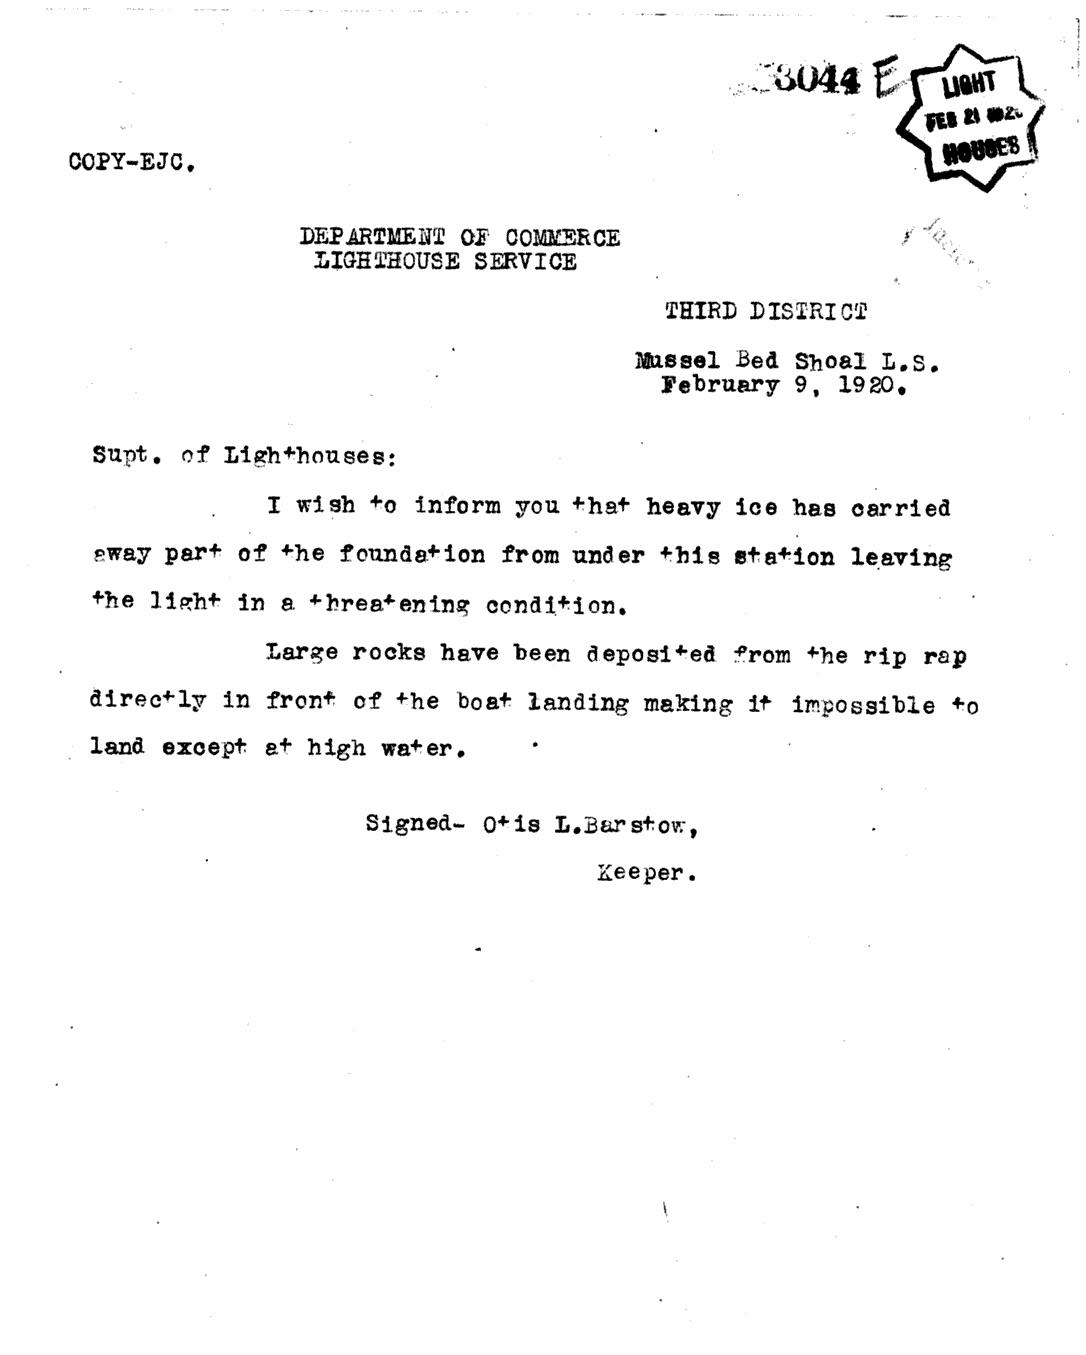 Keeper's Letter About Damaged to Lighthouse Foundation 